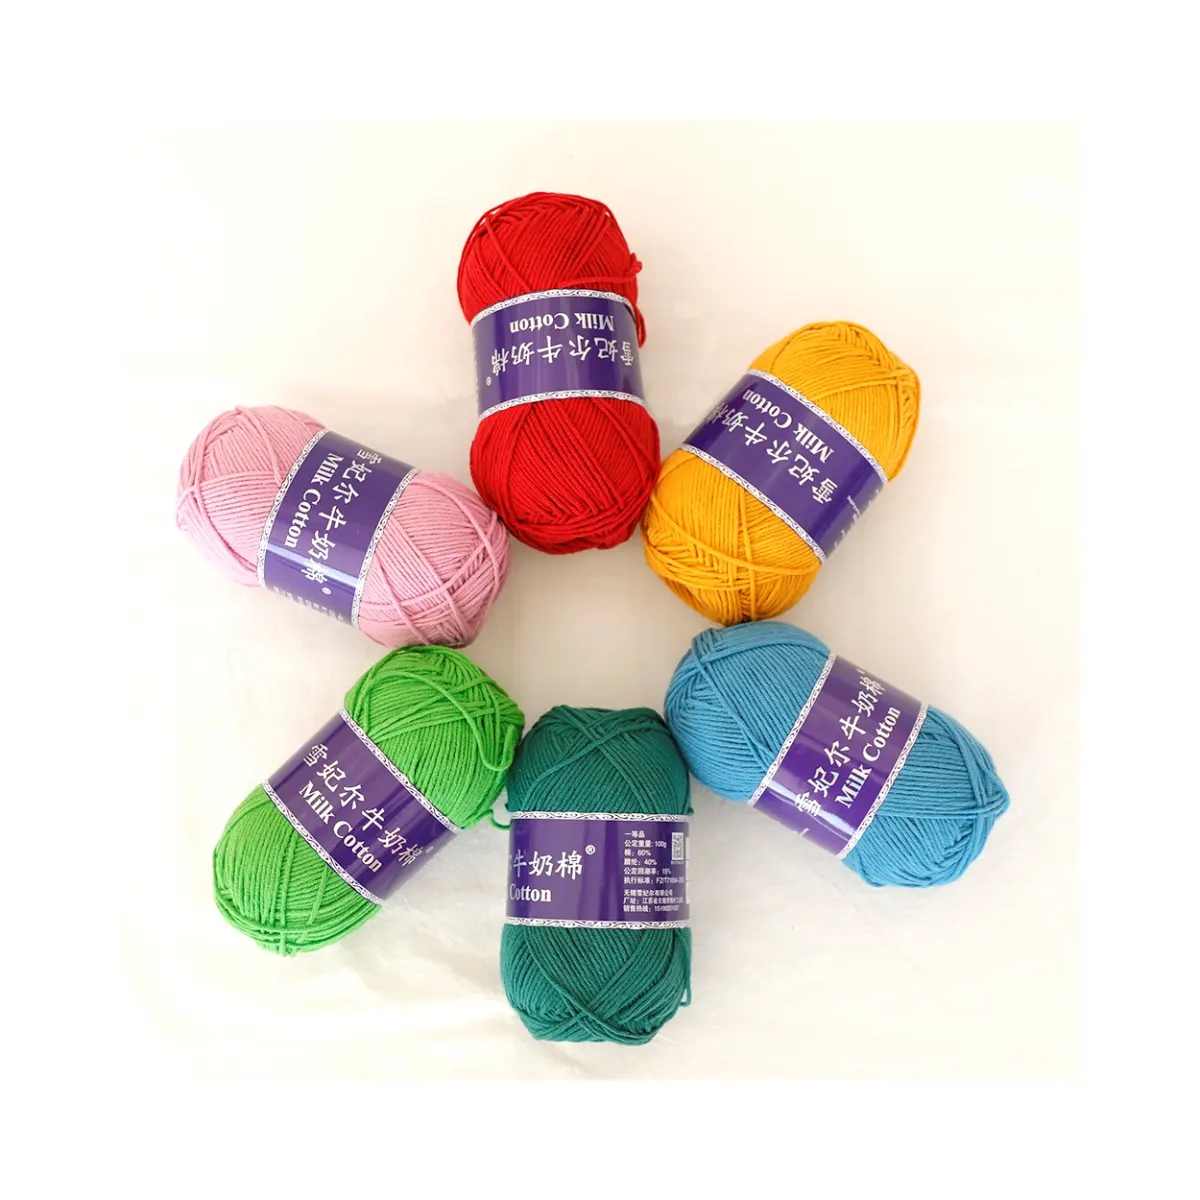 75 Colour Blended Yarn 5 Strands 100g/Ball Soft Worsted Weight Knitting for Babies Thick Milk Cotton Crochet Yarn Dyed Pattern